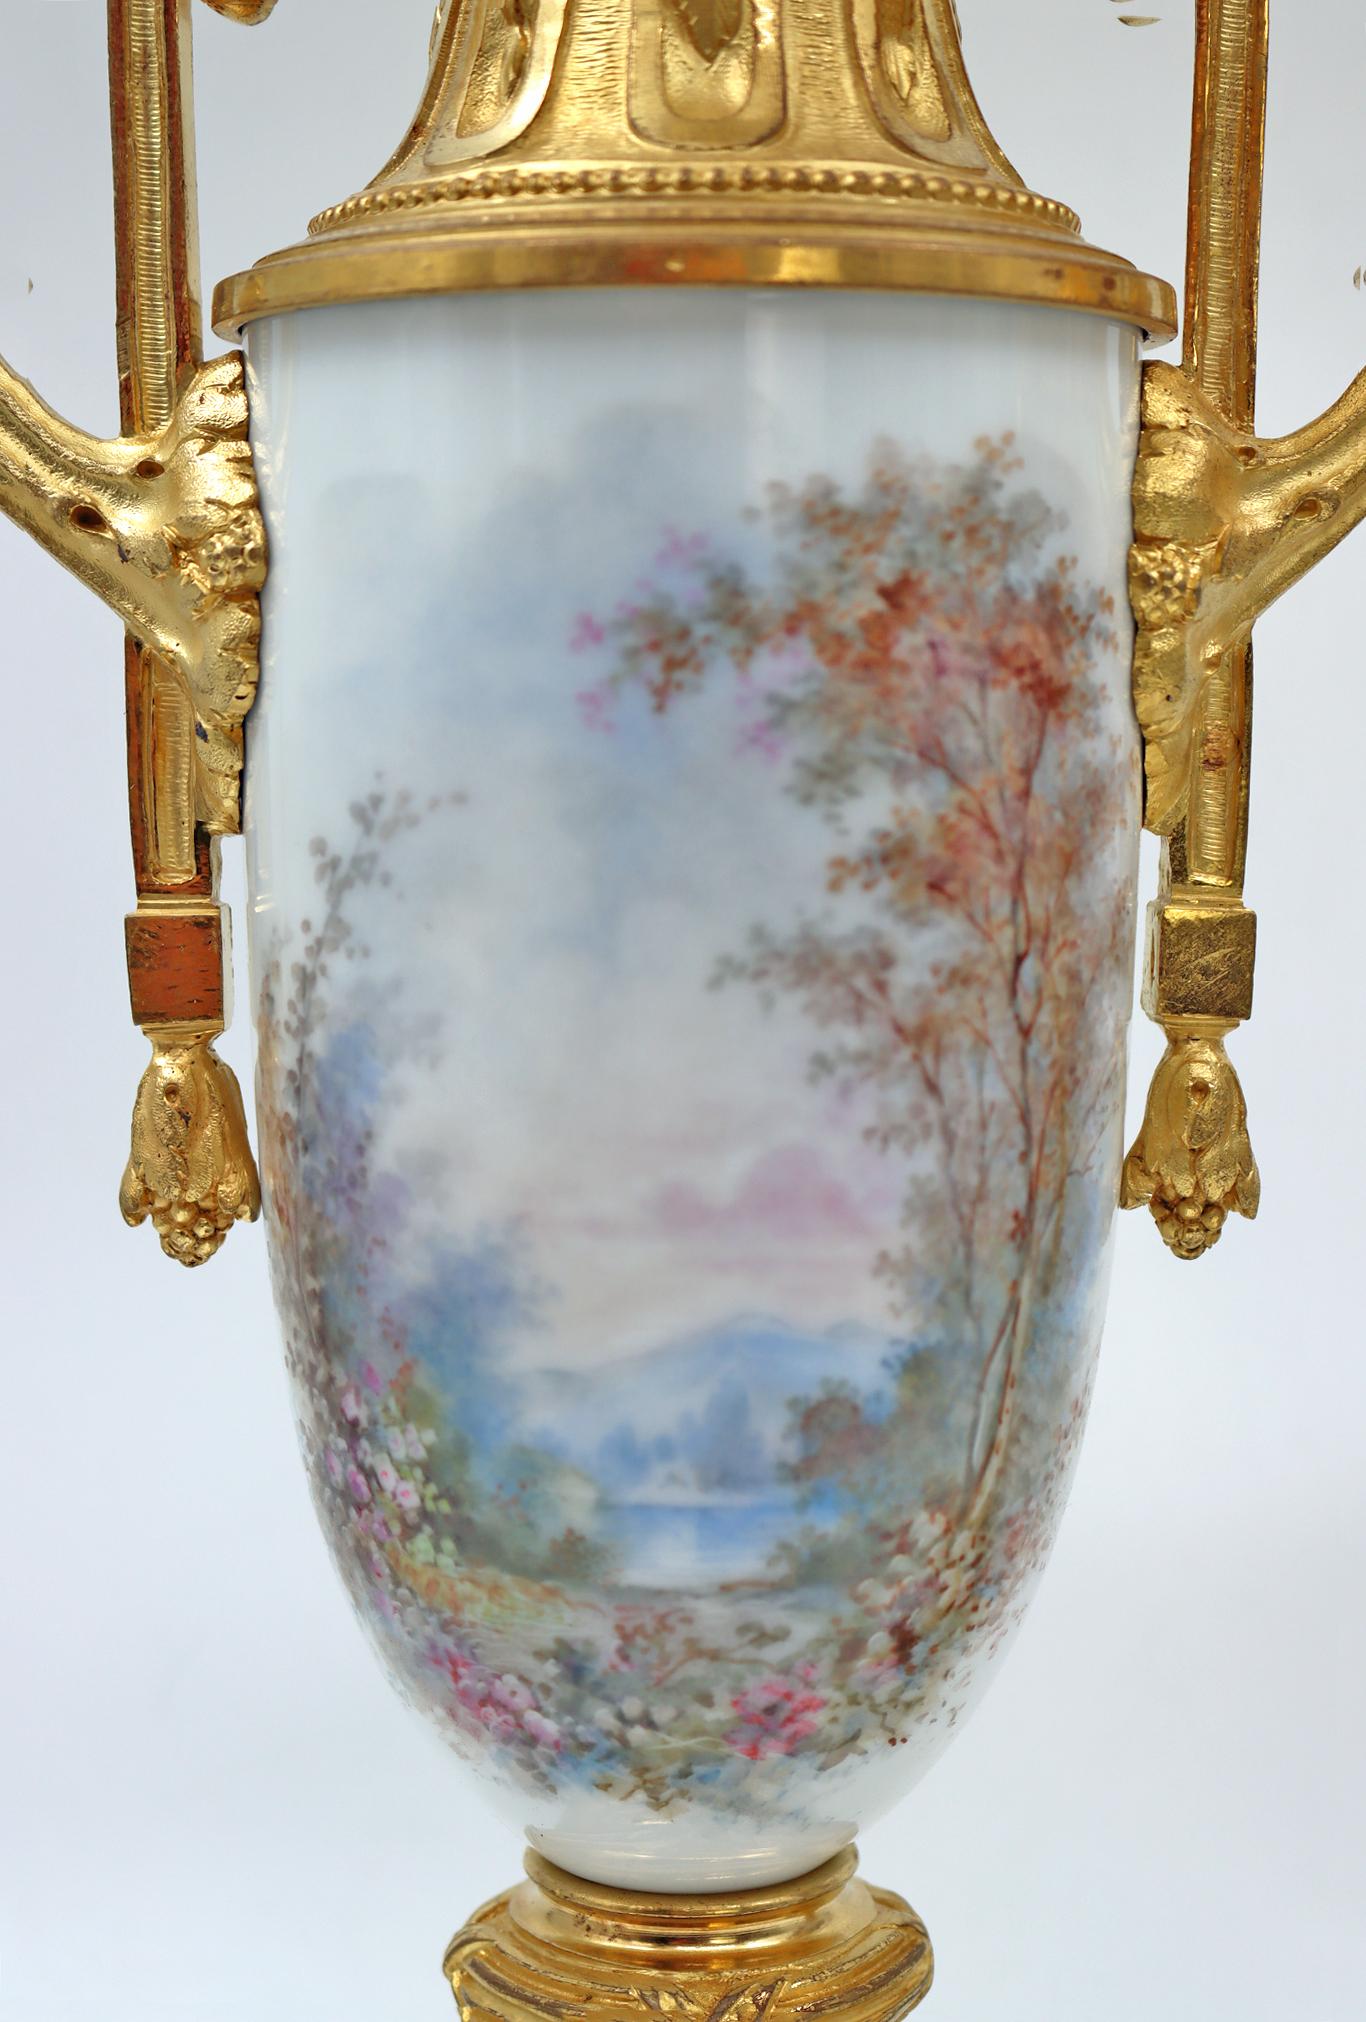 A pair of Sèvres porcelain vases, mounted with gilt bronze and Onyx base, surmounted by a crystal cup, very beautiful decoration of elegant woman and cherub, signed porcelain, Napoleon III period, 19th century
Measures: H: 51 cm, W: 17,5 cm, D: